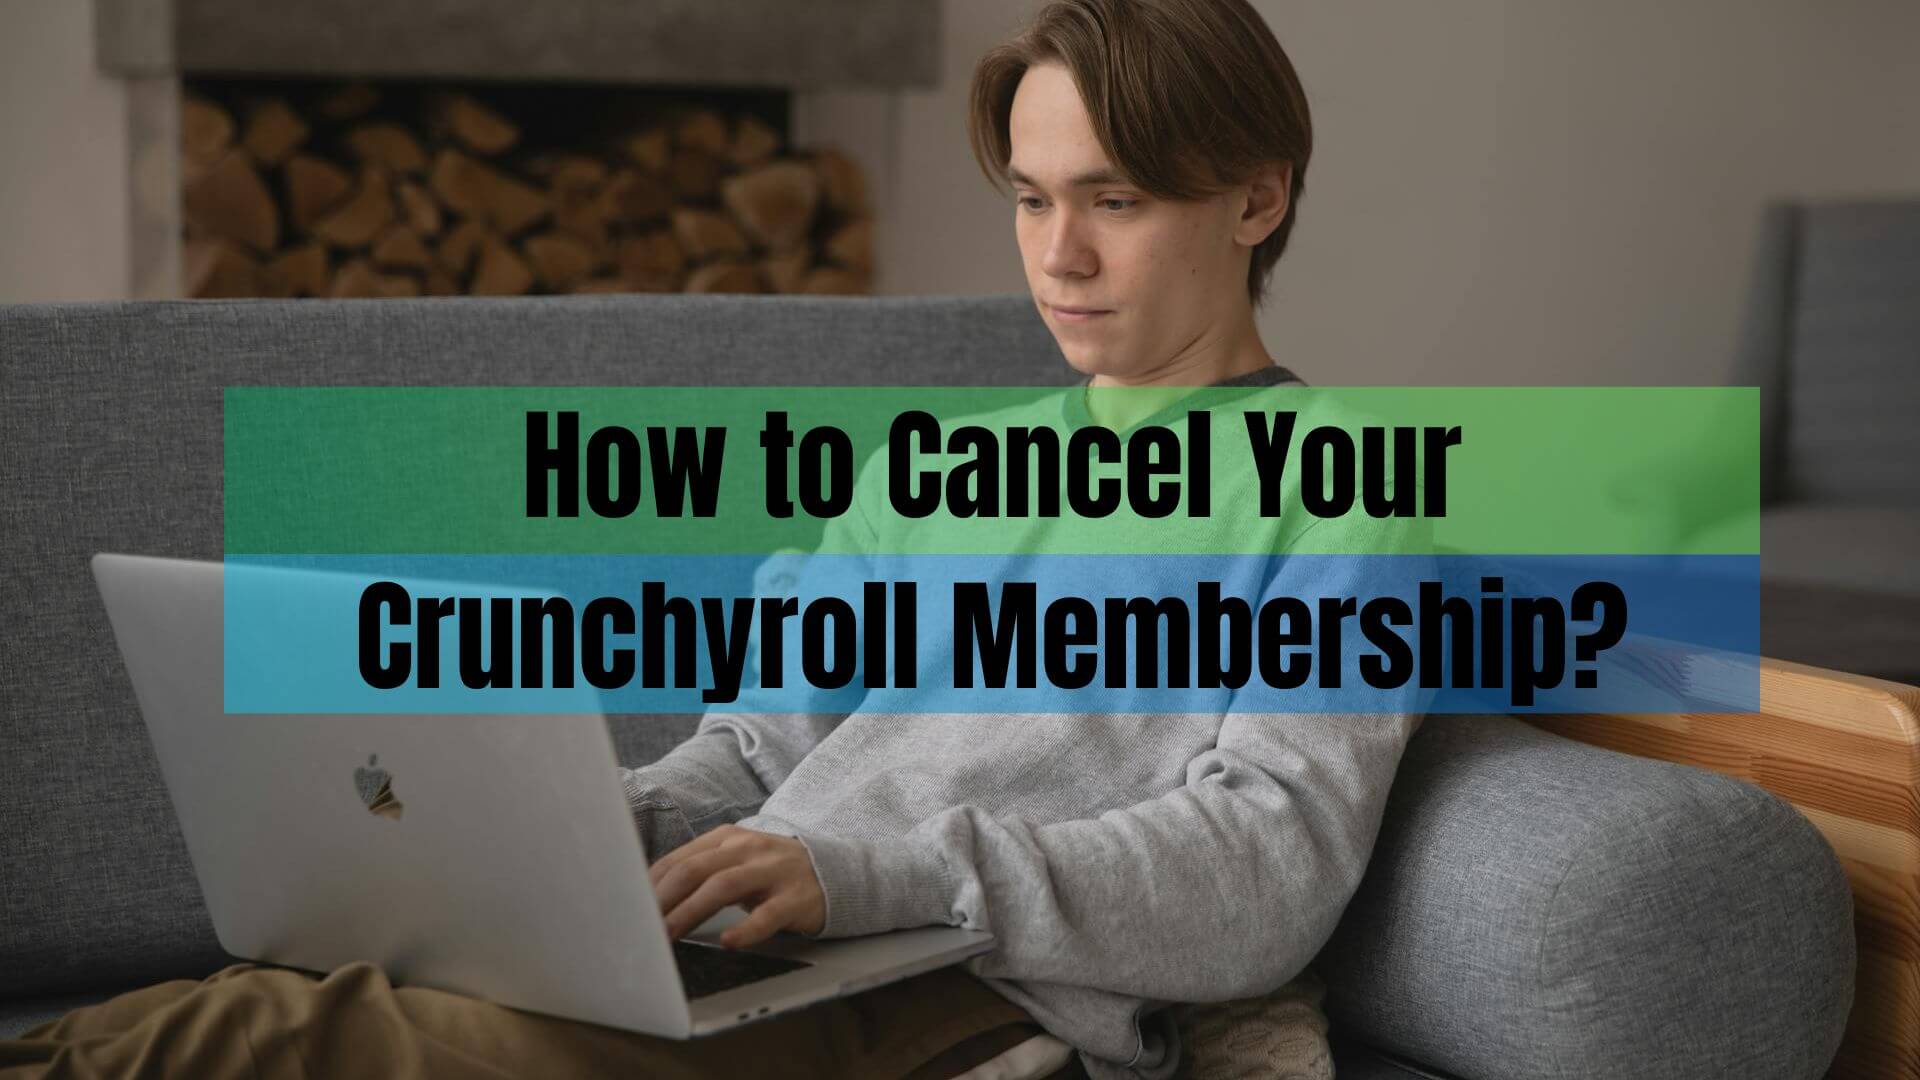 Crunchyroll Overview, Streaming Services Guide